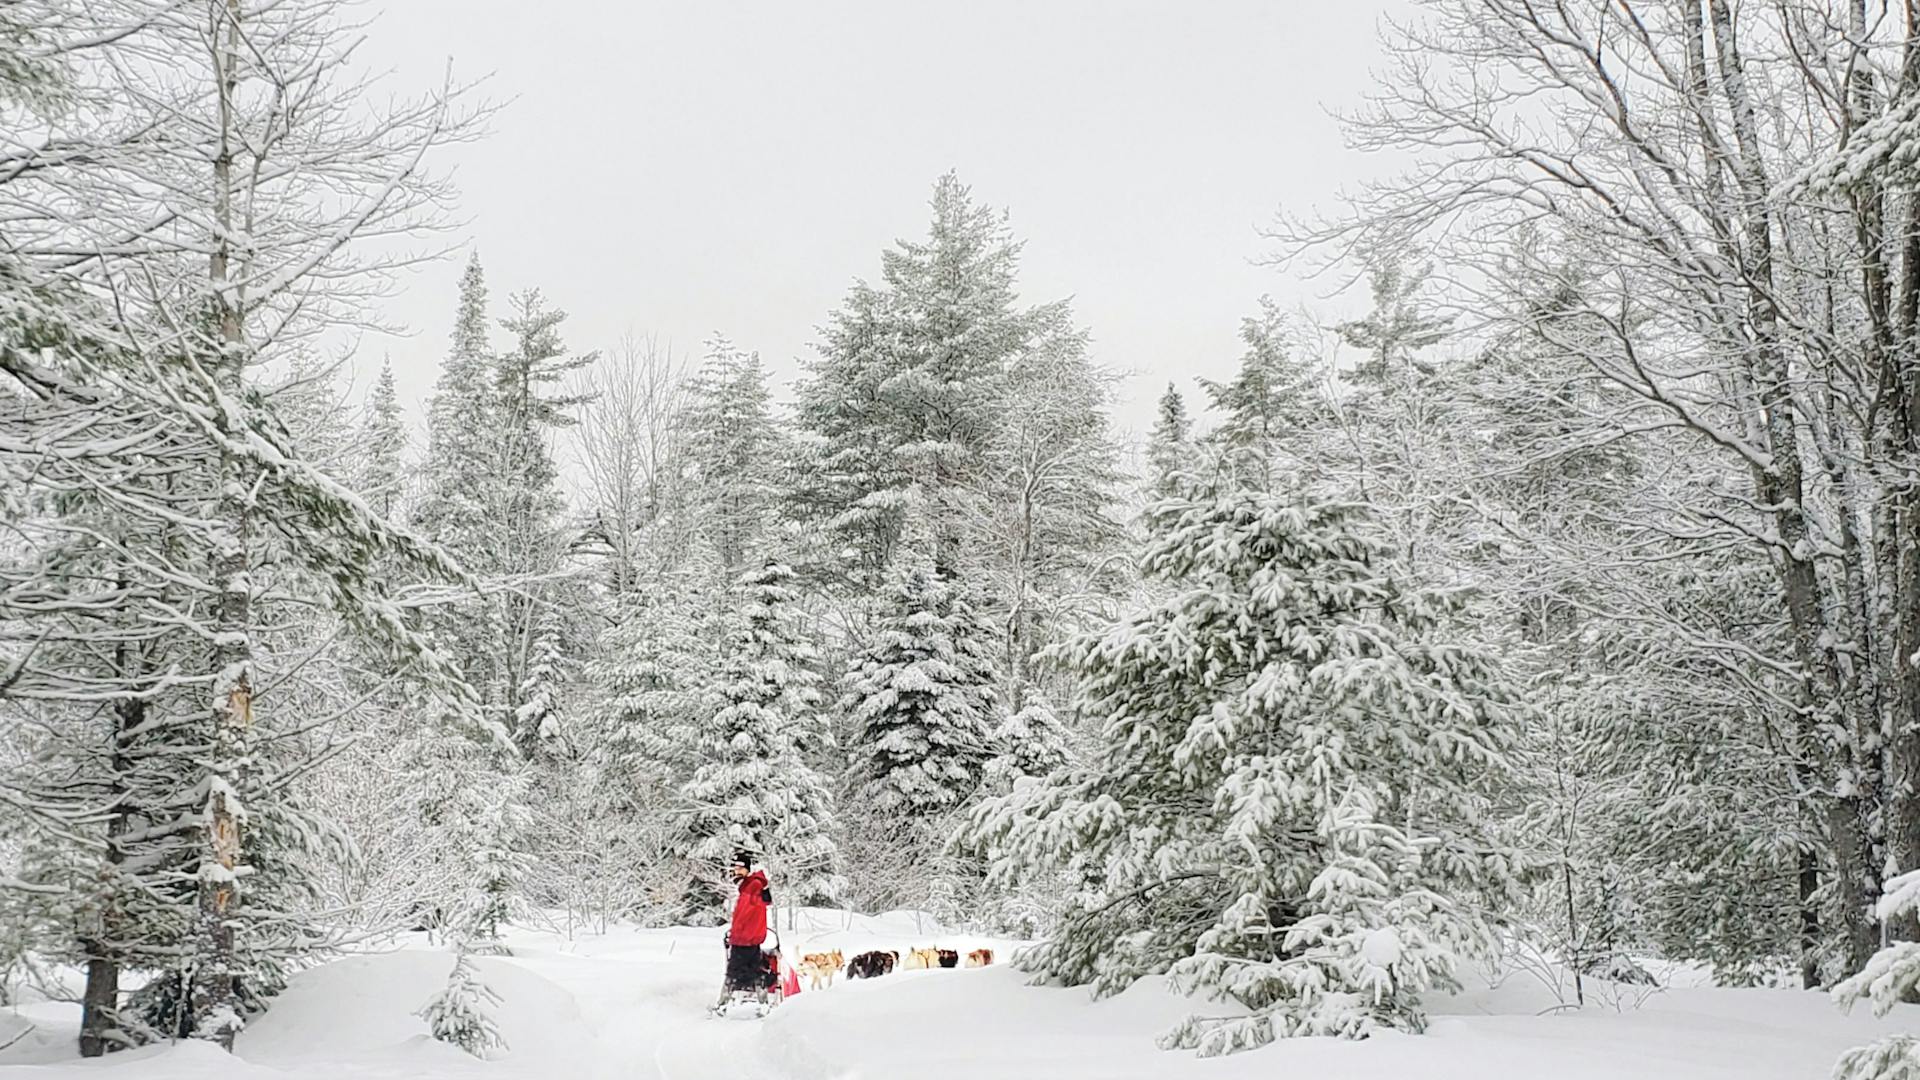 Nature’s Kennel Sled Dog Racing and Adventures in McMillan, Michigan (photo courtesy of destination)